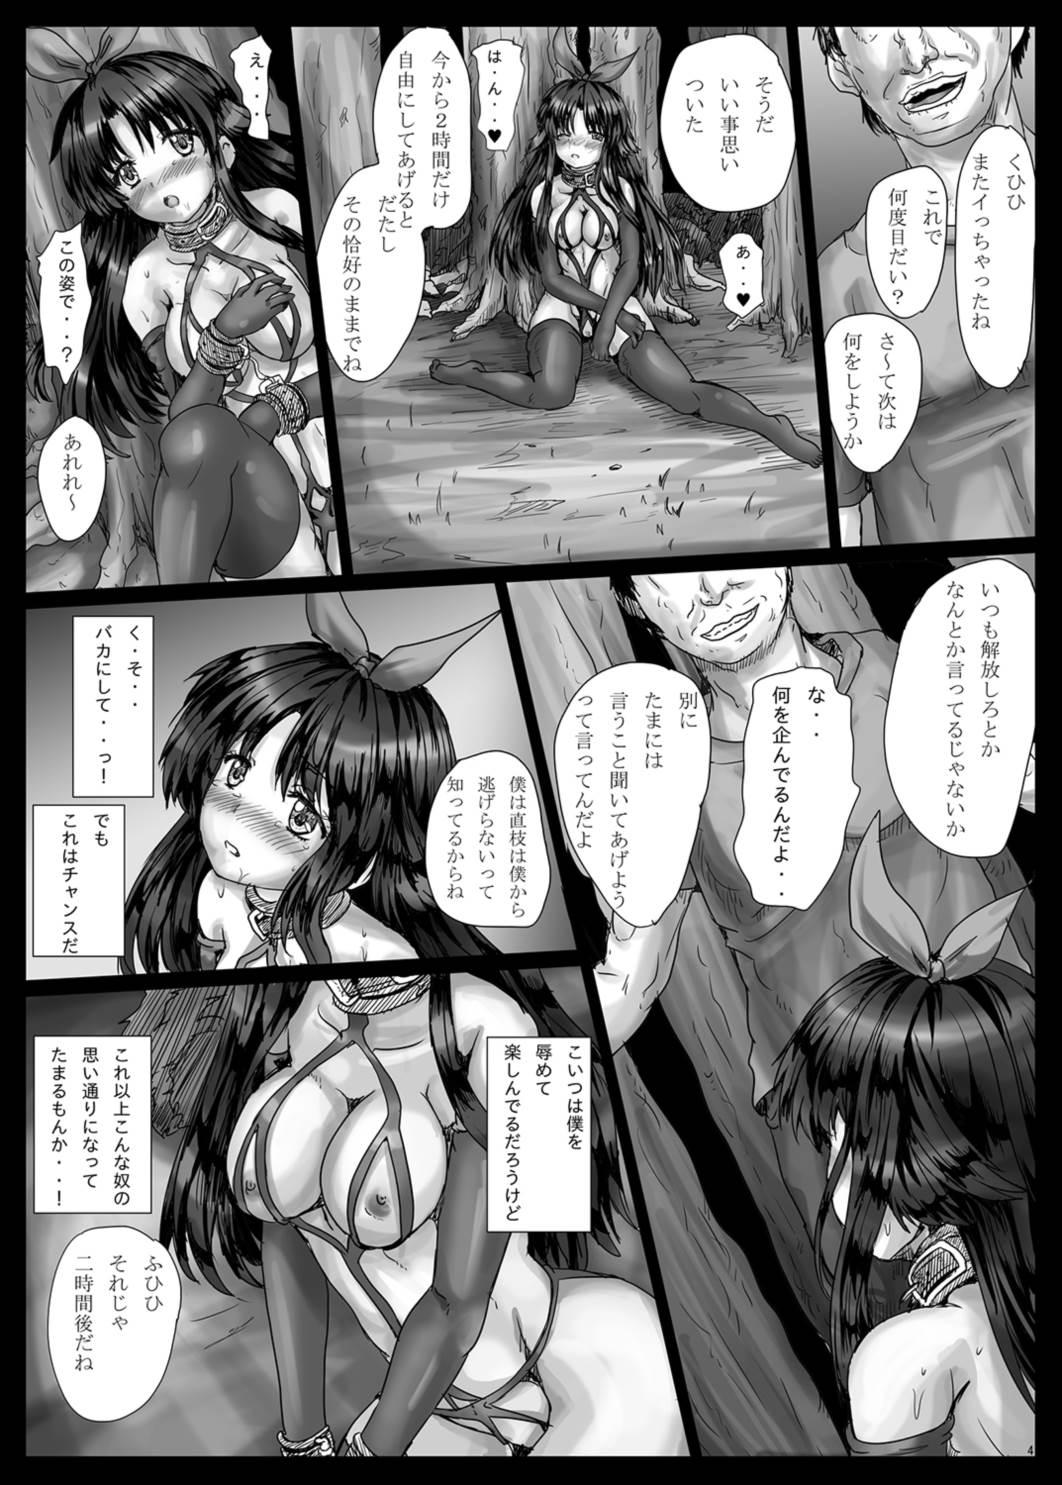 Thong BindLBR5 - Little busters Step Fantasy - Page 5